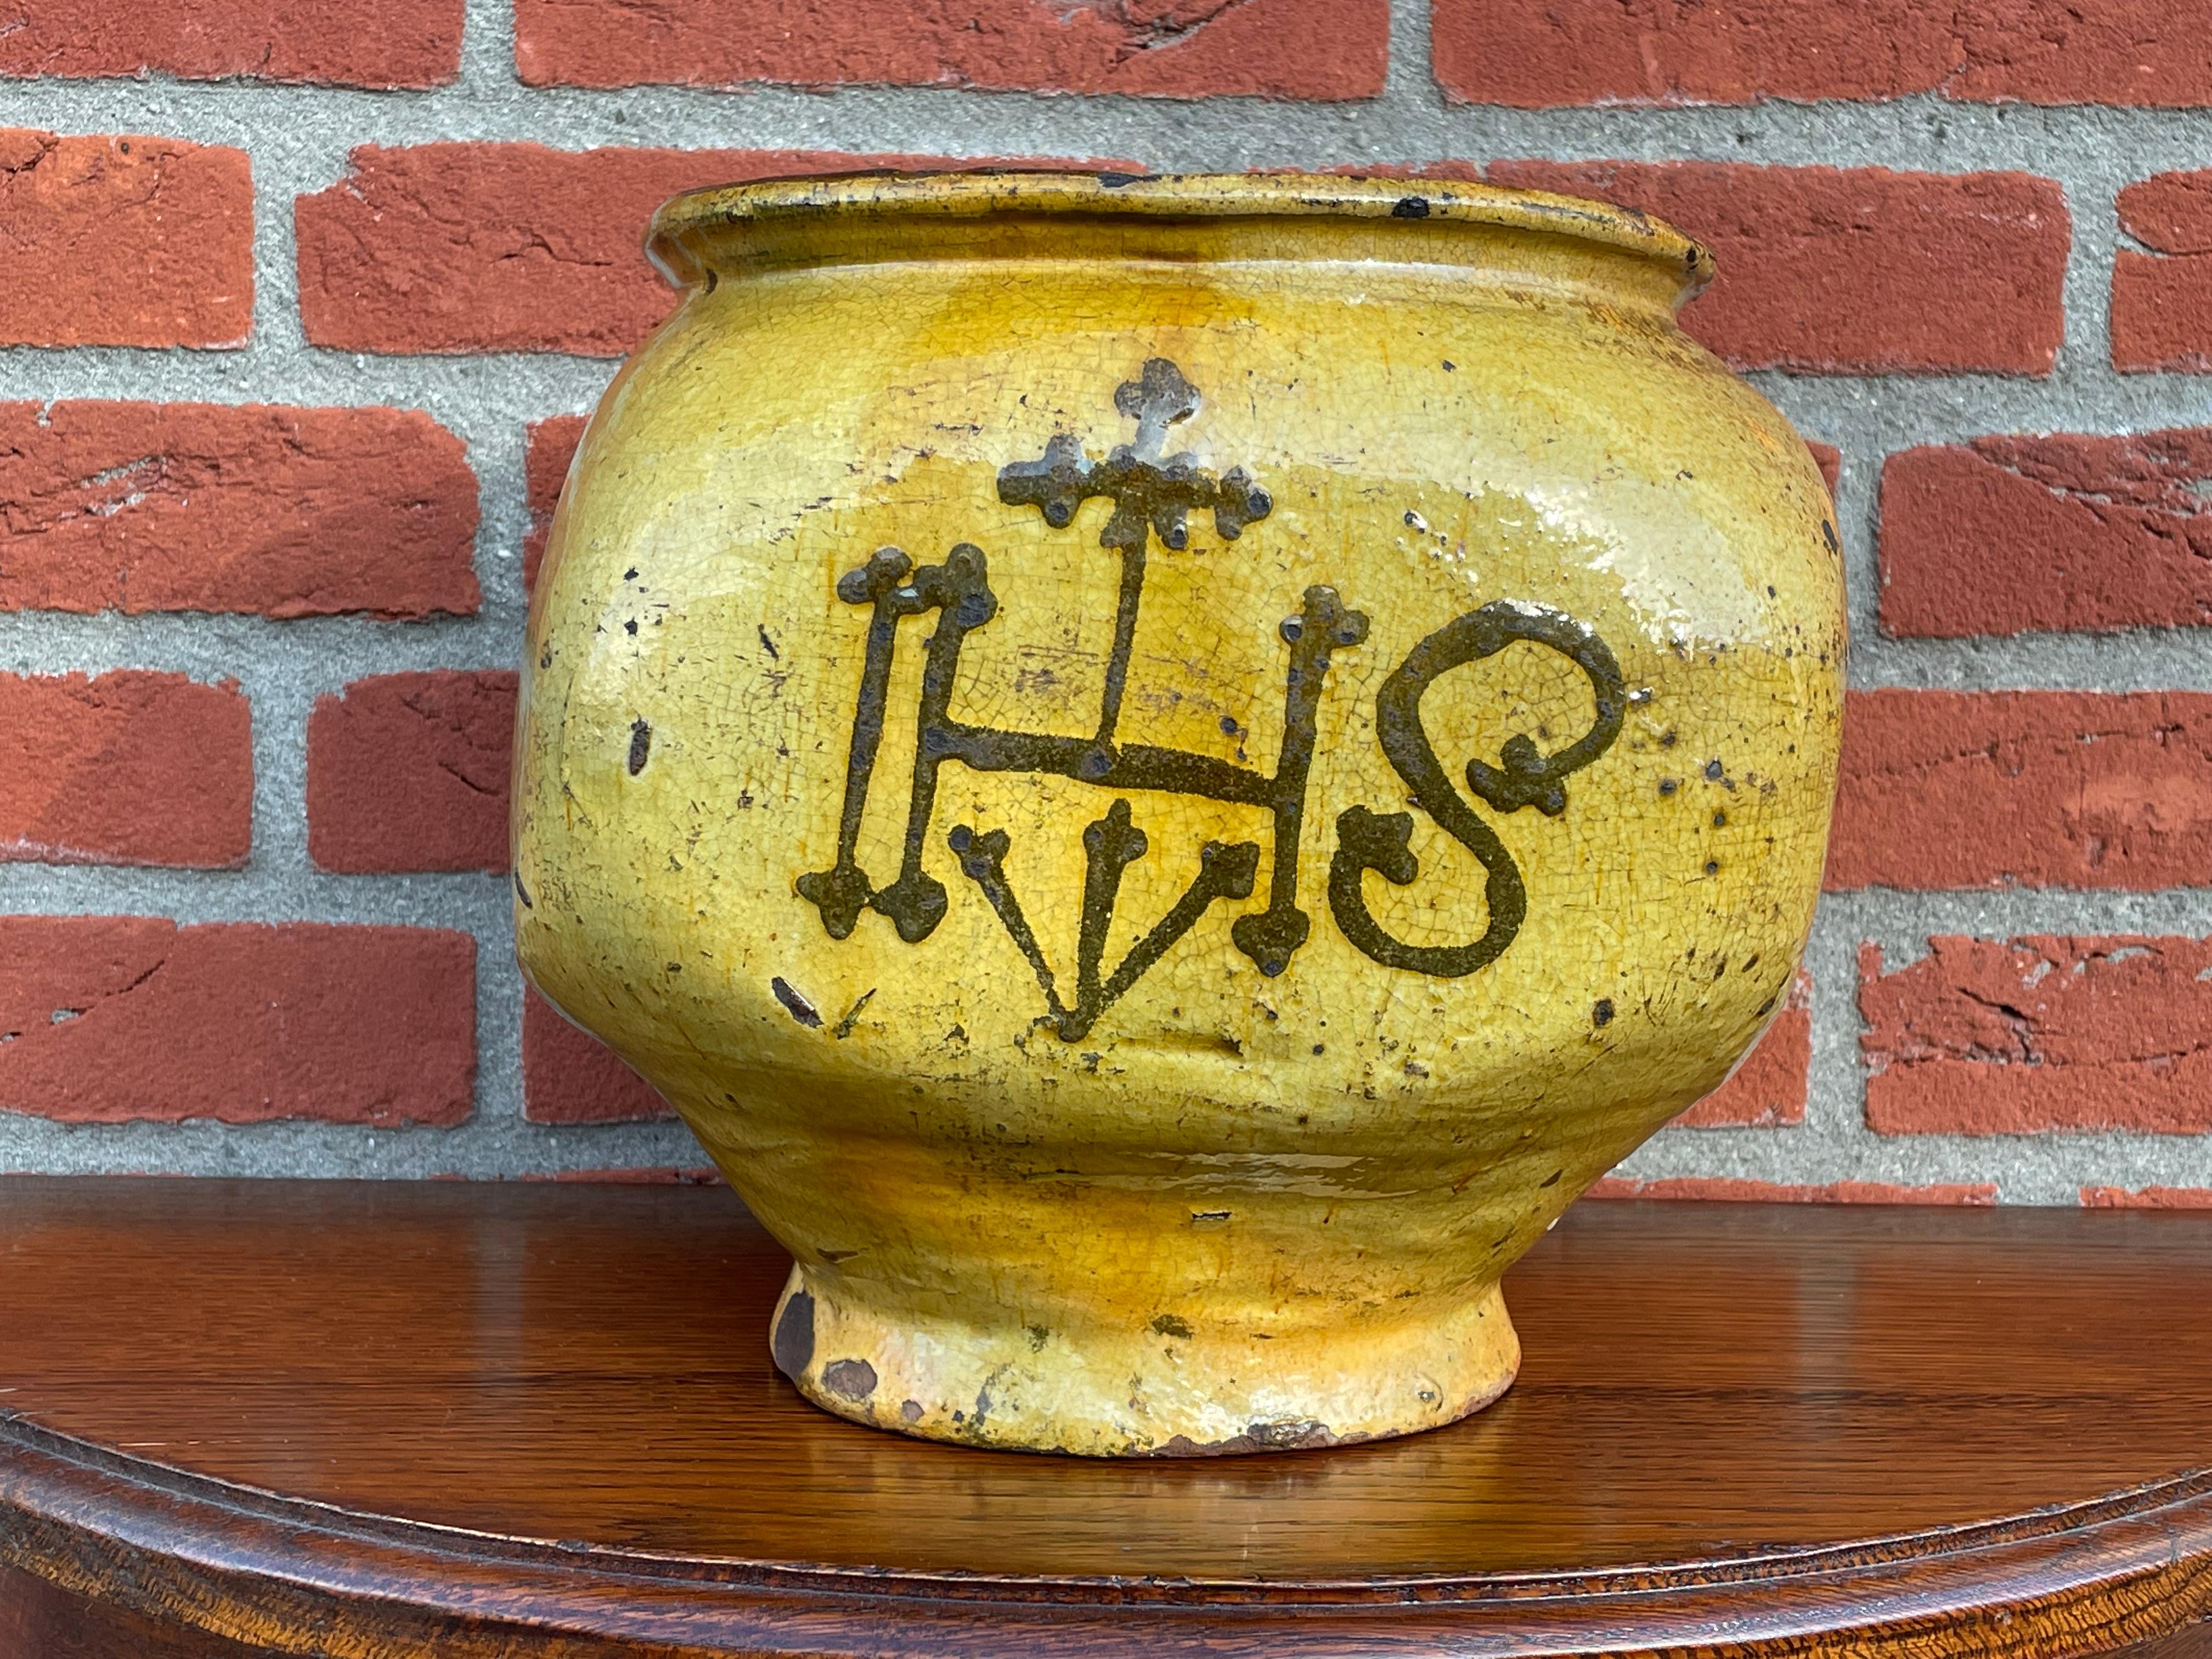 Unique glazed pot with a hand-painted and rare Gothic Christogram. Possibly medieval.

Over the past decades we have seen and sold many works of religious art, but we never before had the pleasure of offering such a unique and all handcrafted and